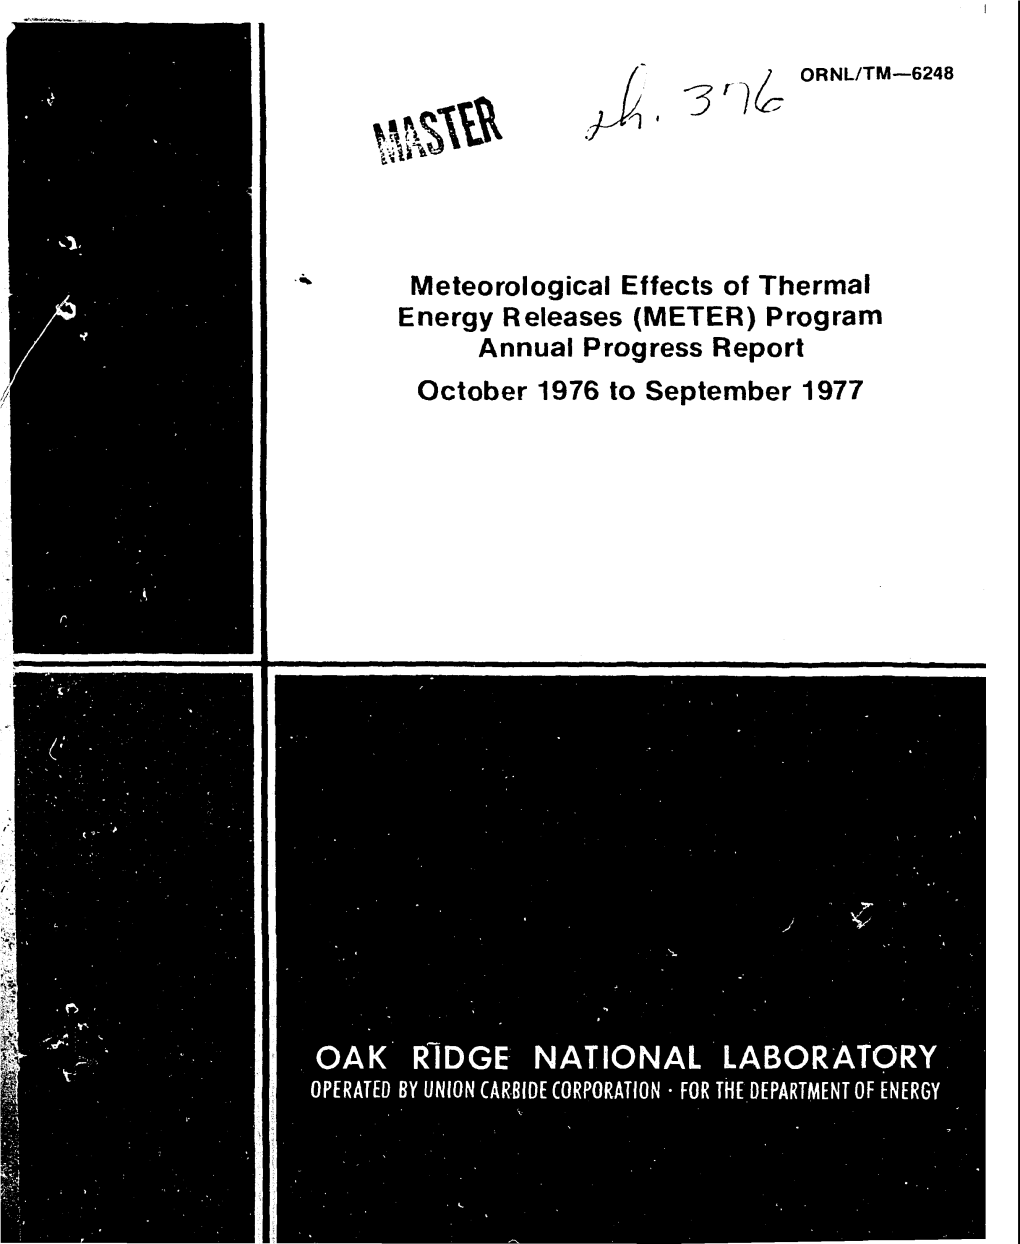 OAK RIDGE NATIONAL LABORATORY OPERATED BV UNION CARBIDE CORPORATION • for the DEPARTMENT of ENERGY ORNL/TM-6248 Dist